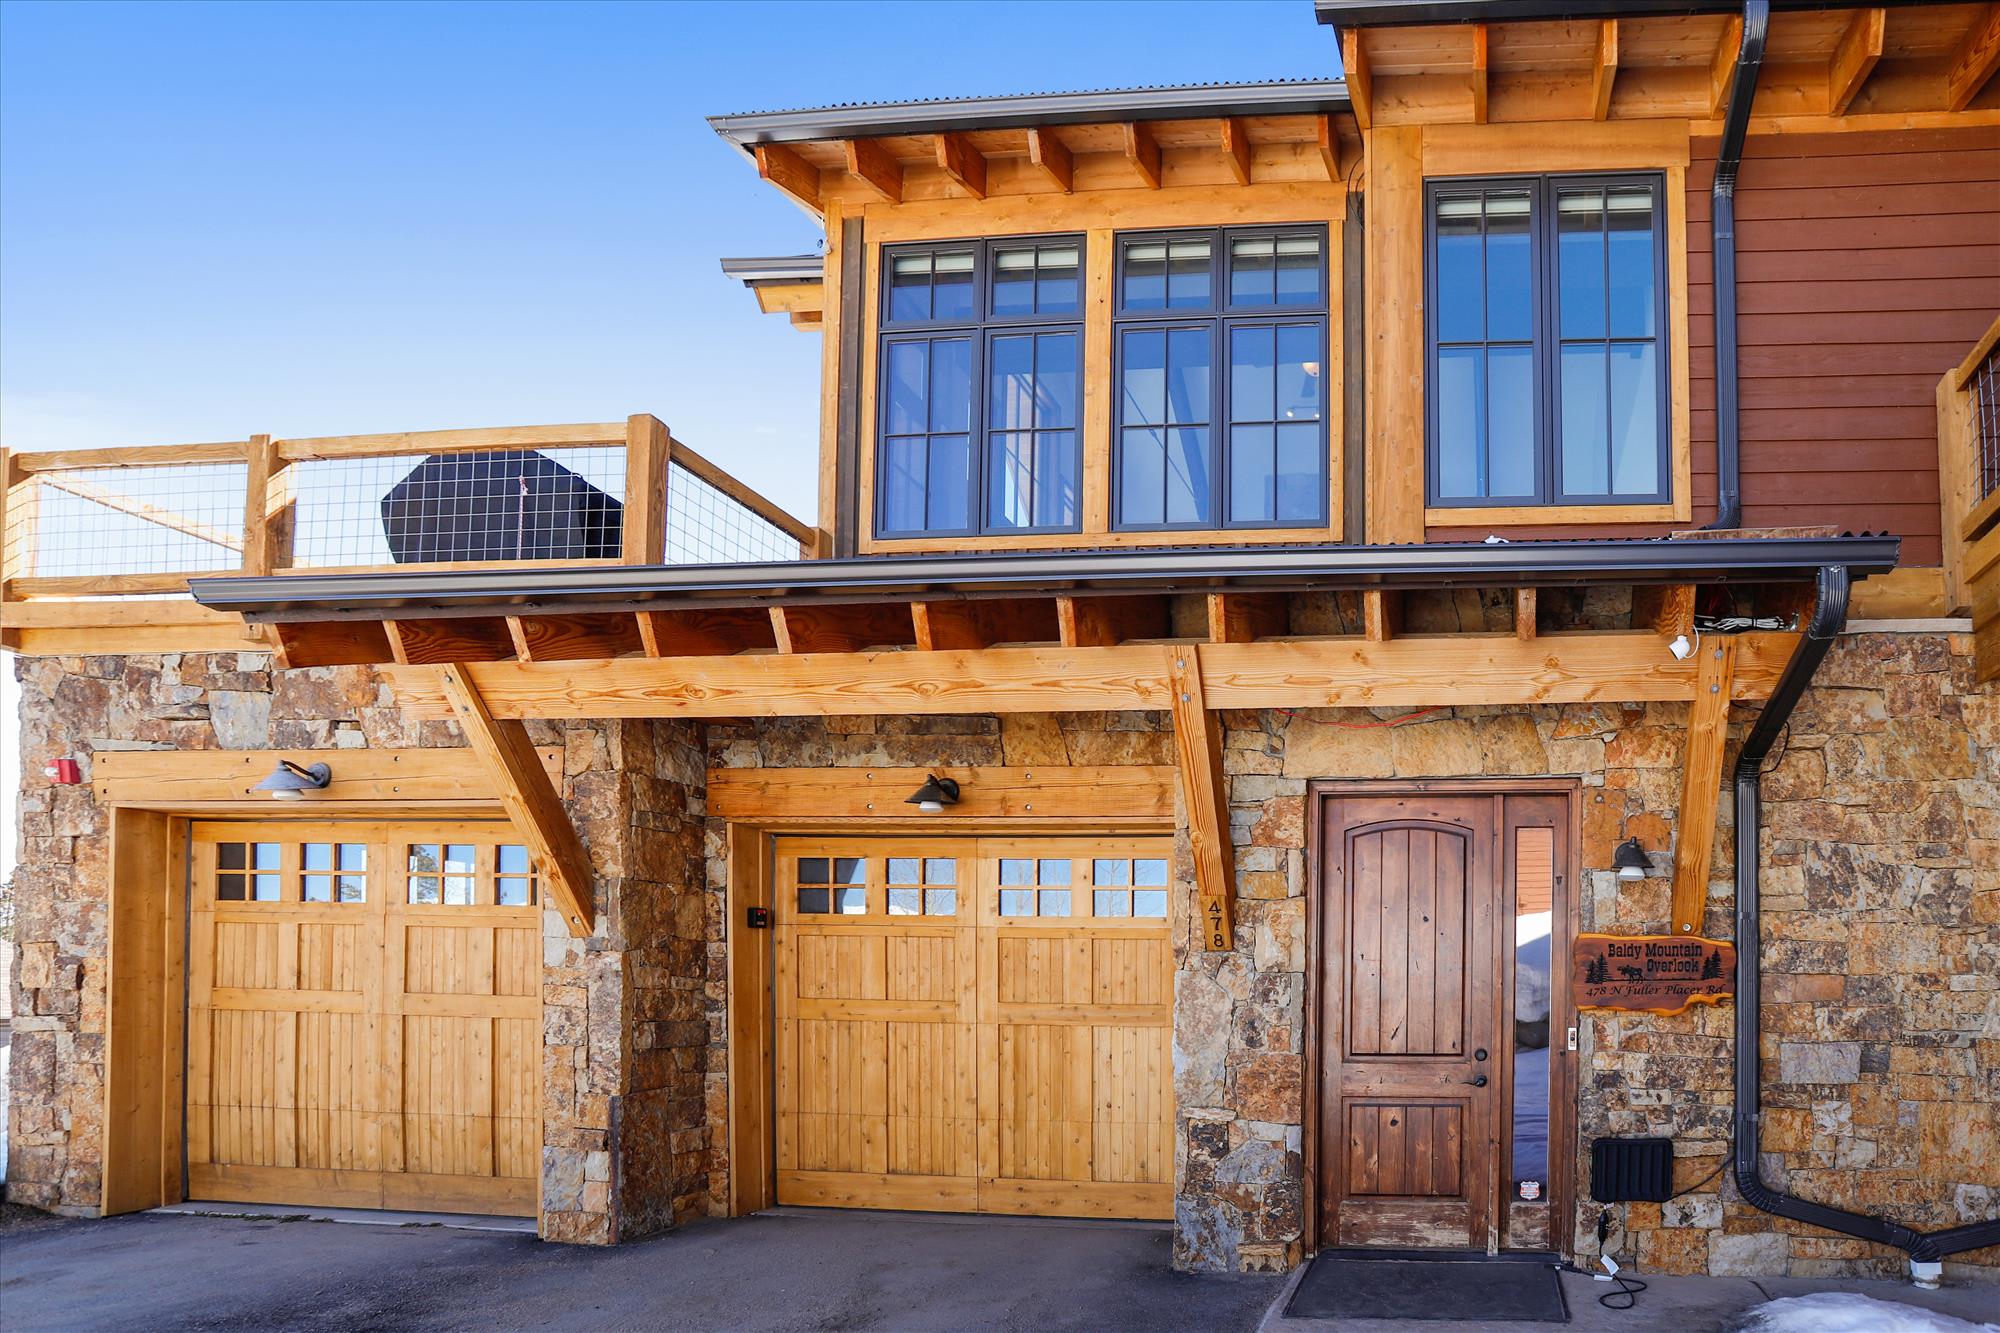 Enjoy unparalleled views of the Ten Mile Range and luxurious in-home amenities